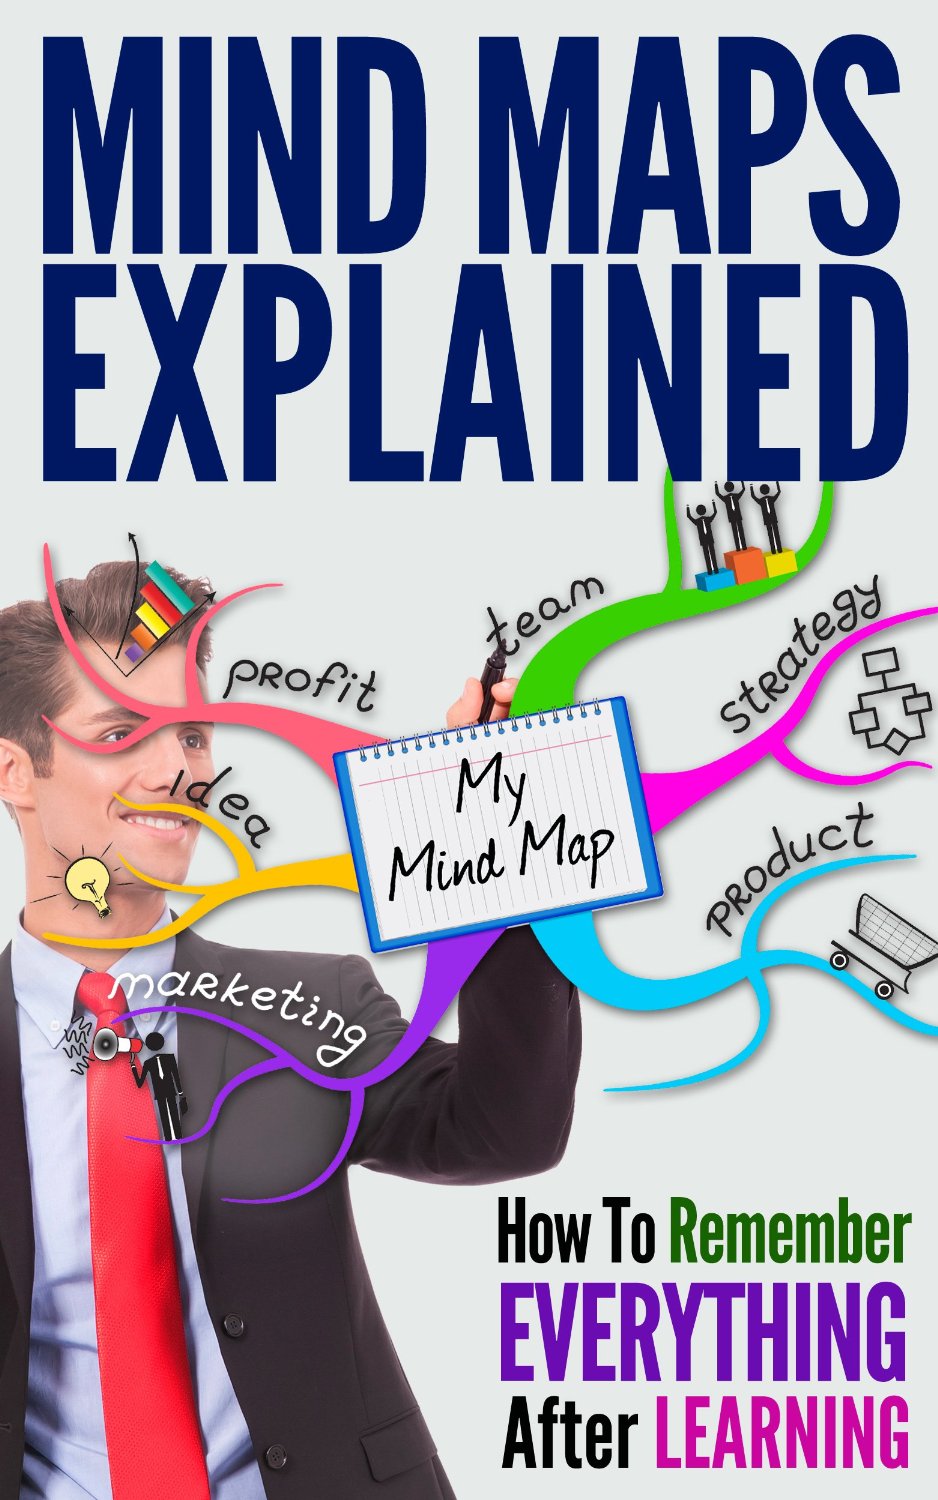 Mind Maps Explained: How To Remember Everything After Learning by How To eBooks